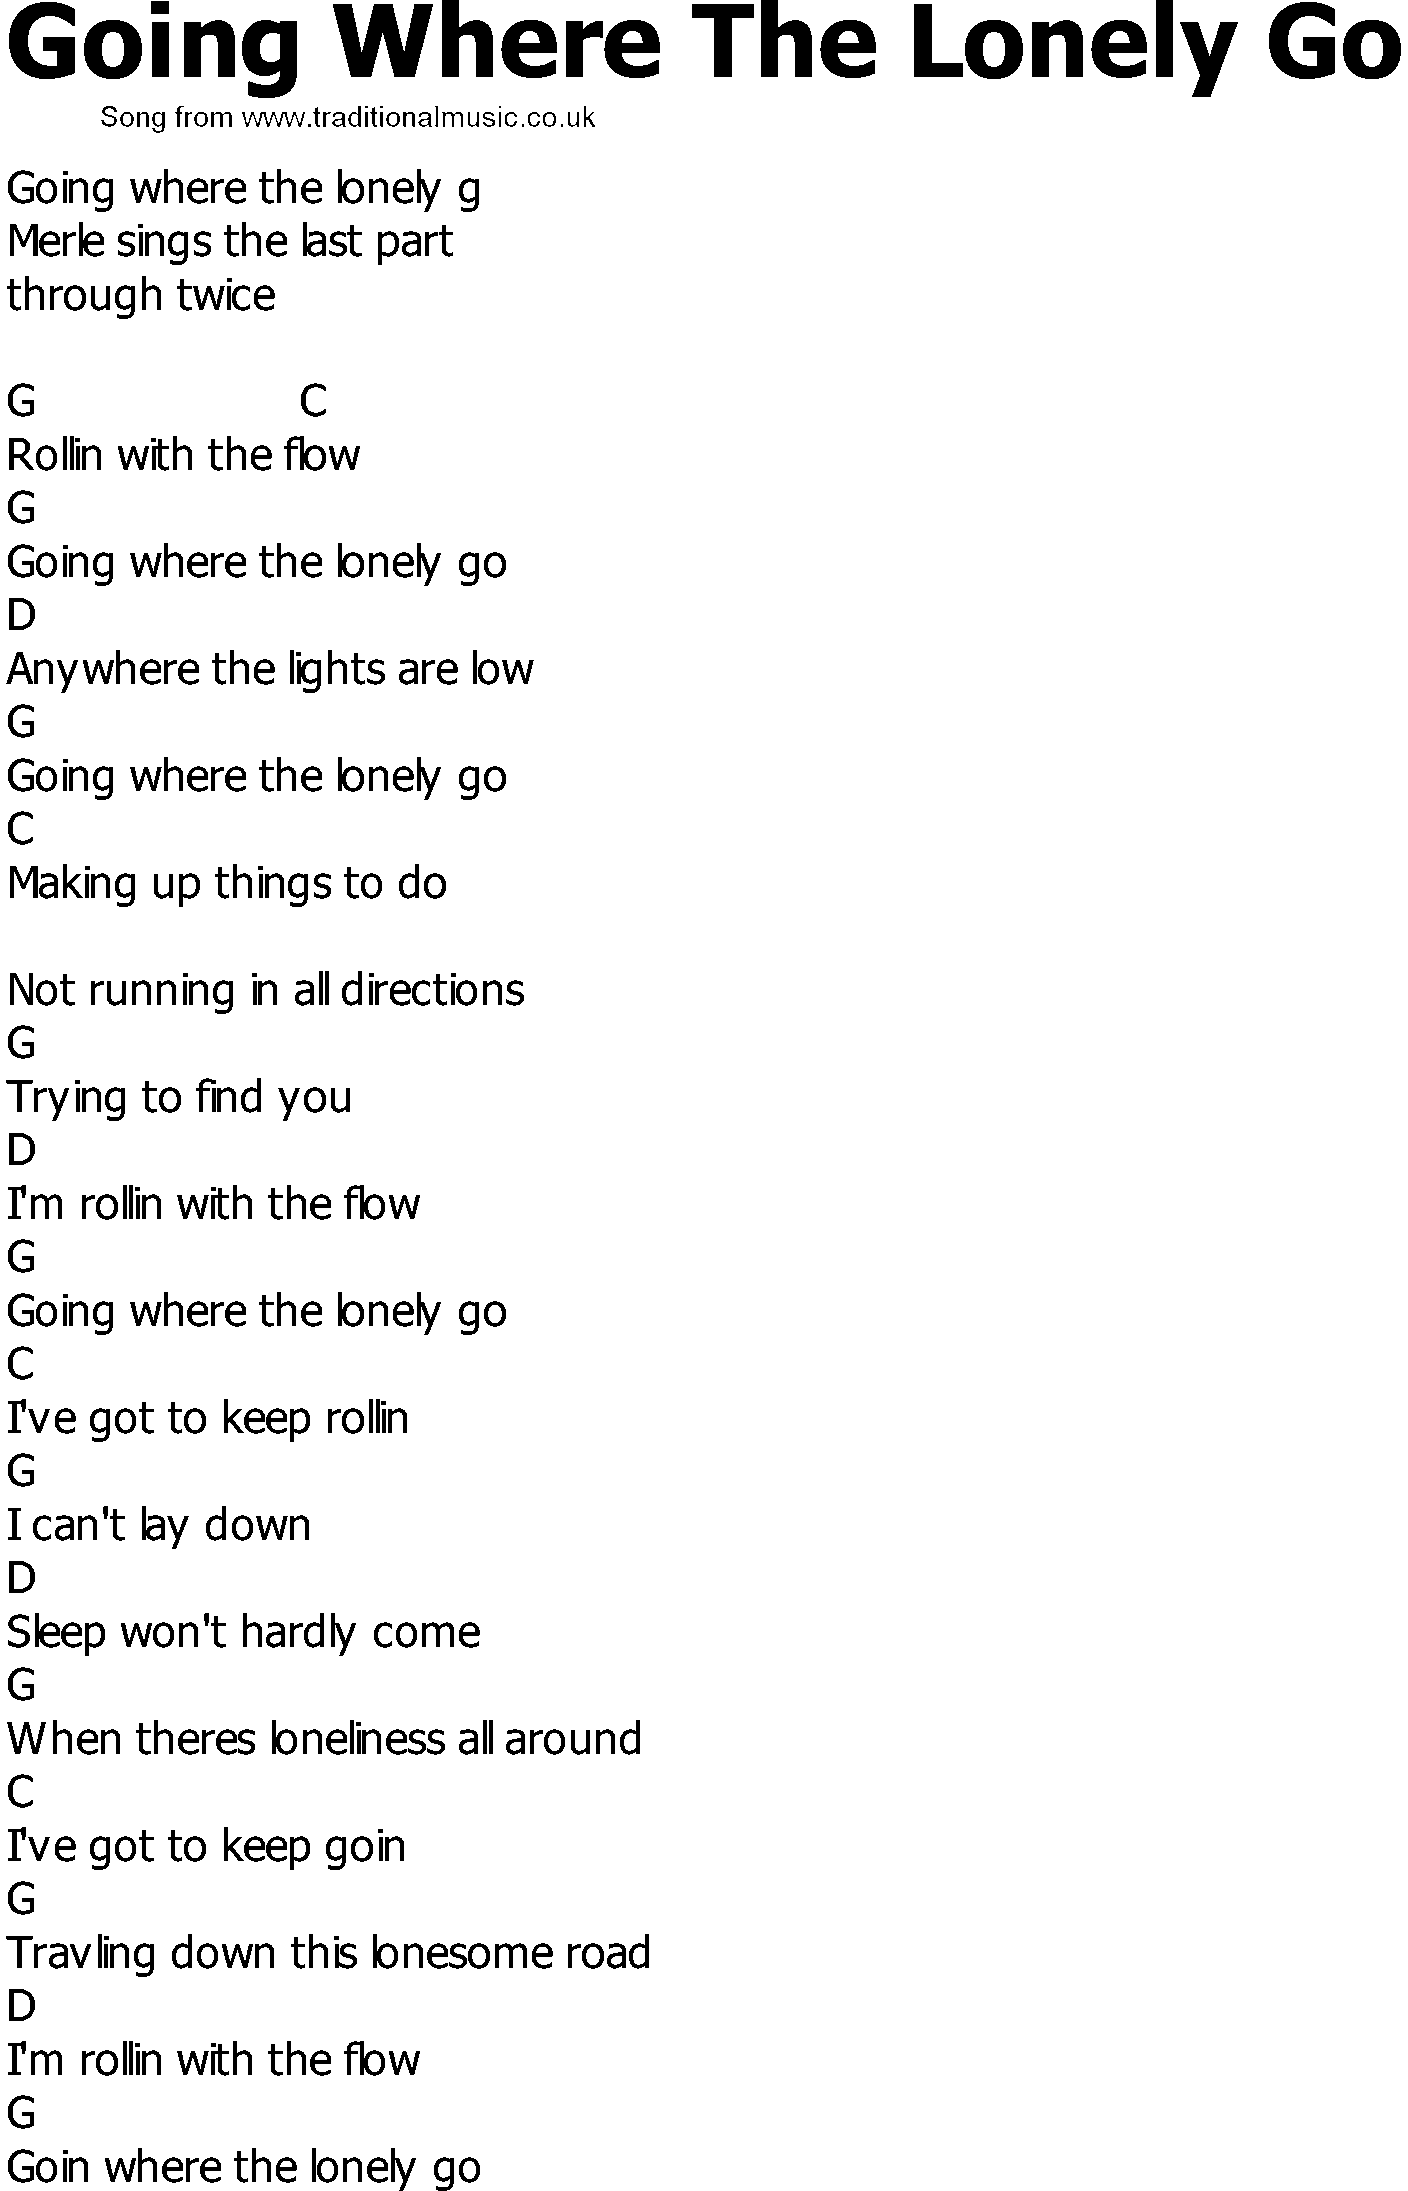 Old Country song lyrics with chords - Going Where The Lonely Go